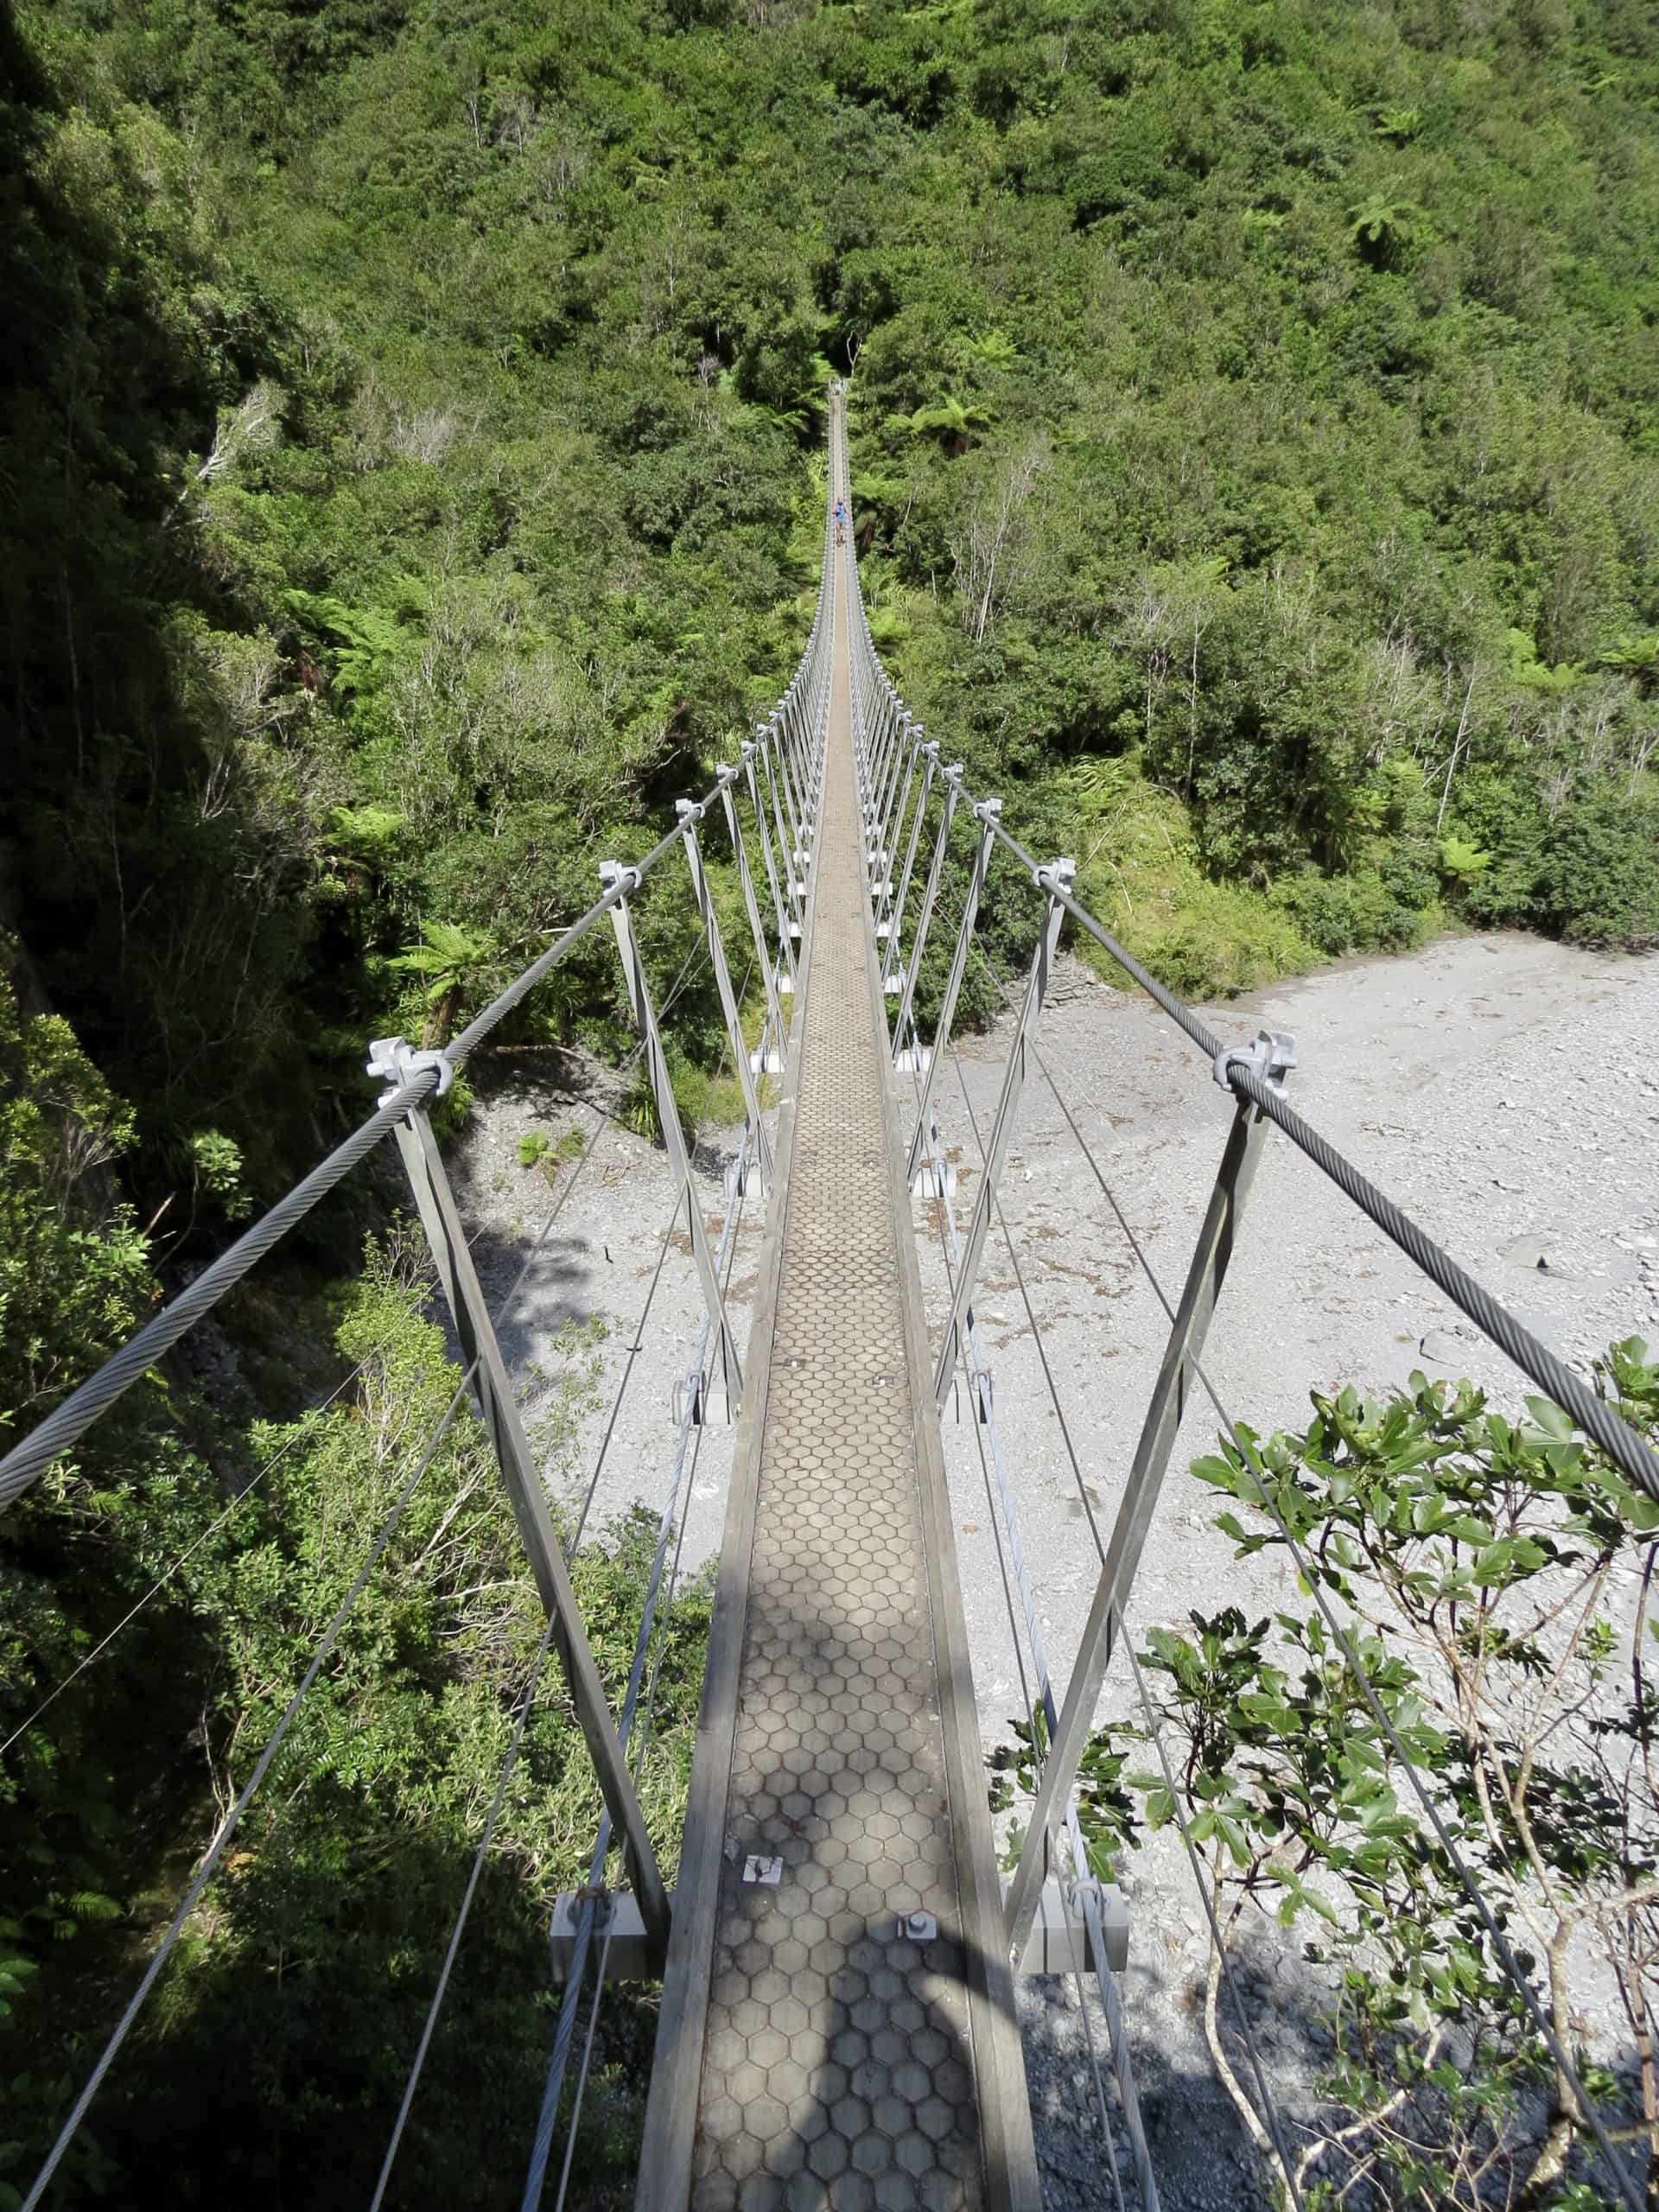 The longest swing bridge on the Roberts Point Day Hike in Franz Josef